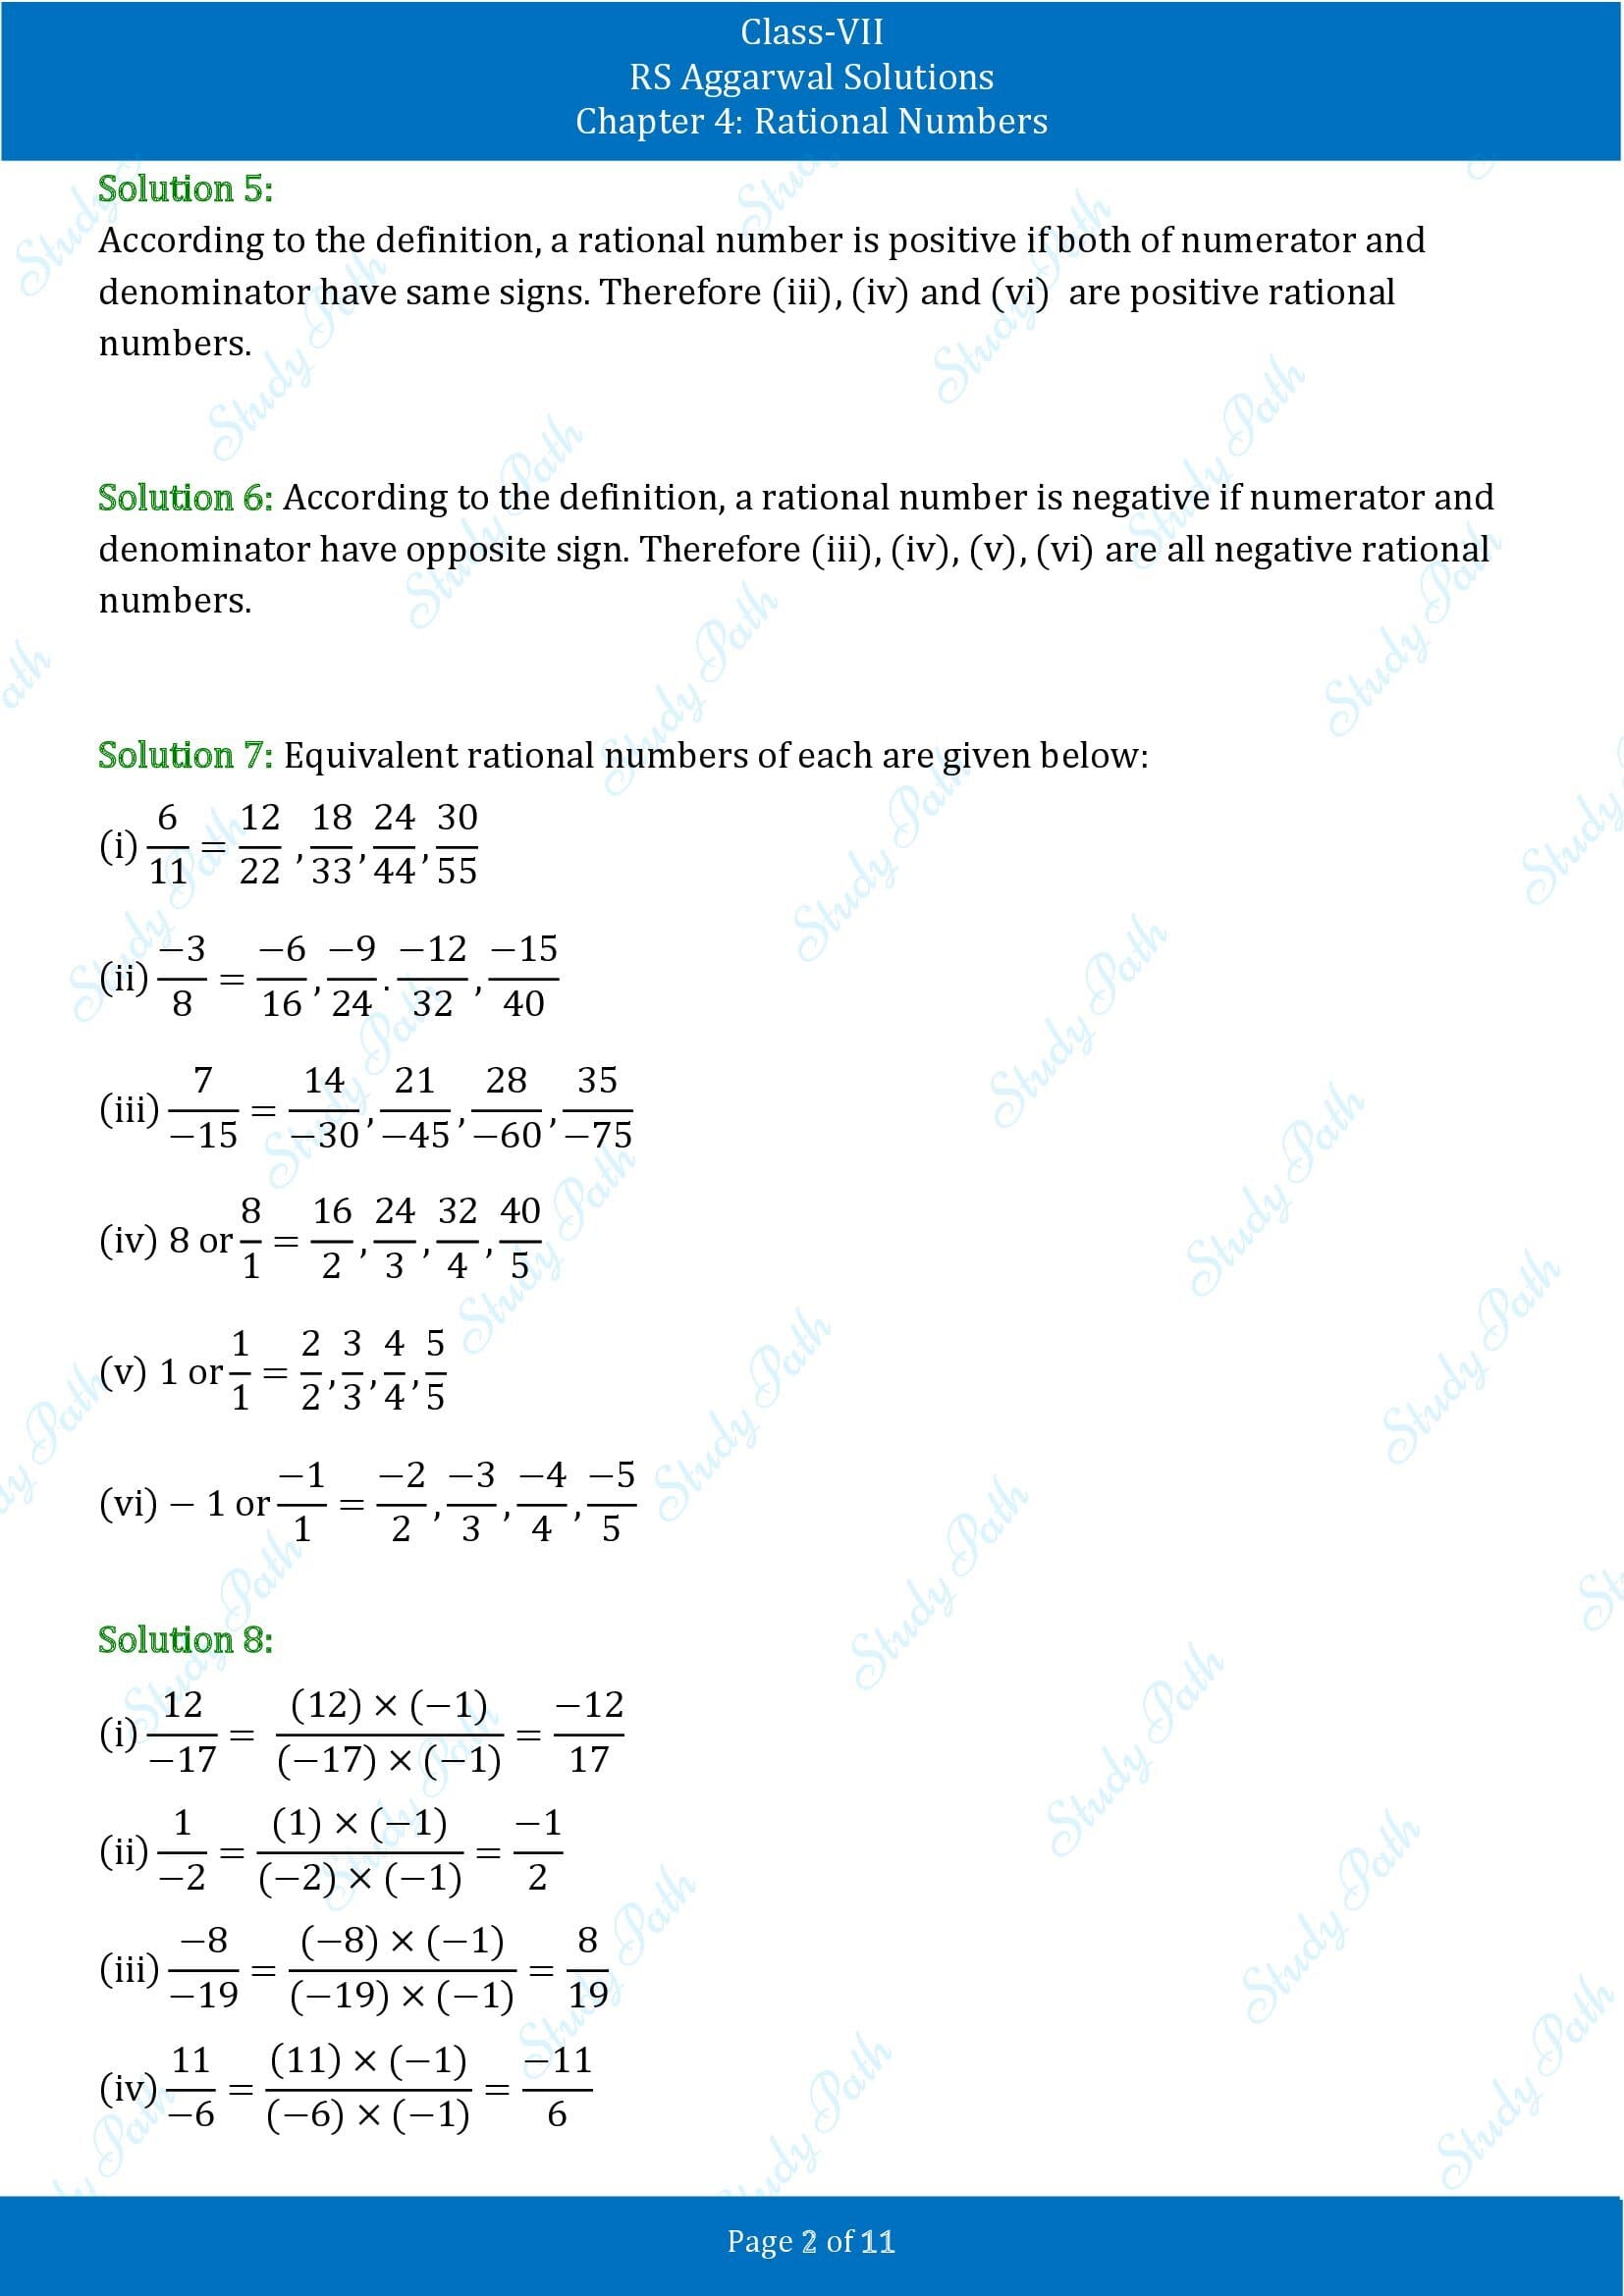 RS Aggarwal Solutions Class 7 Chapter 4 Rational Numbers Exercise 4A 00002